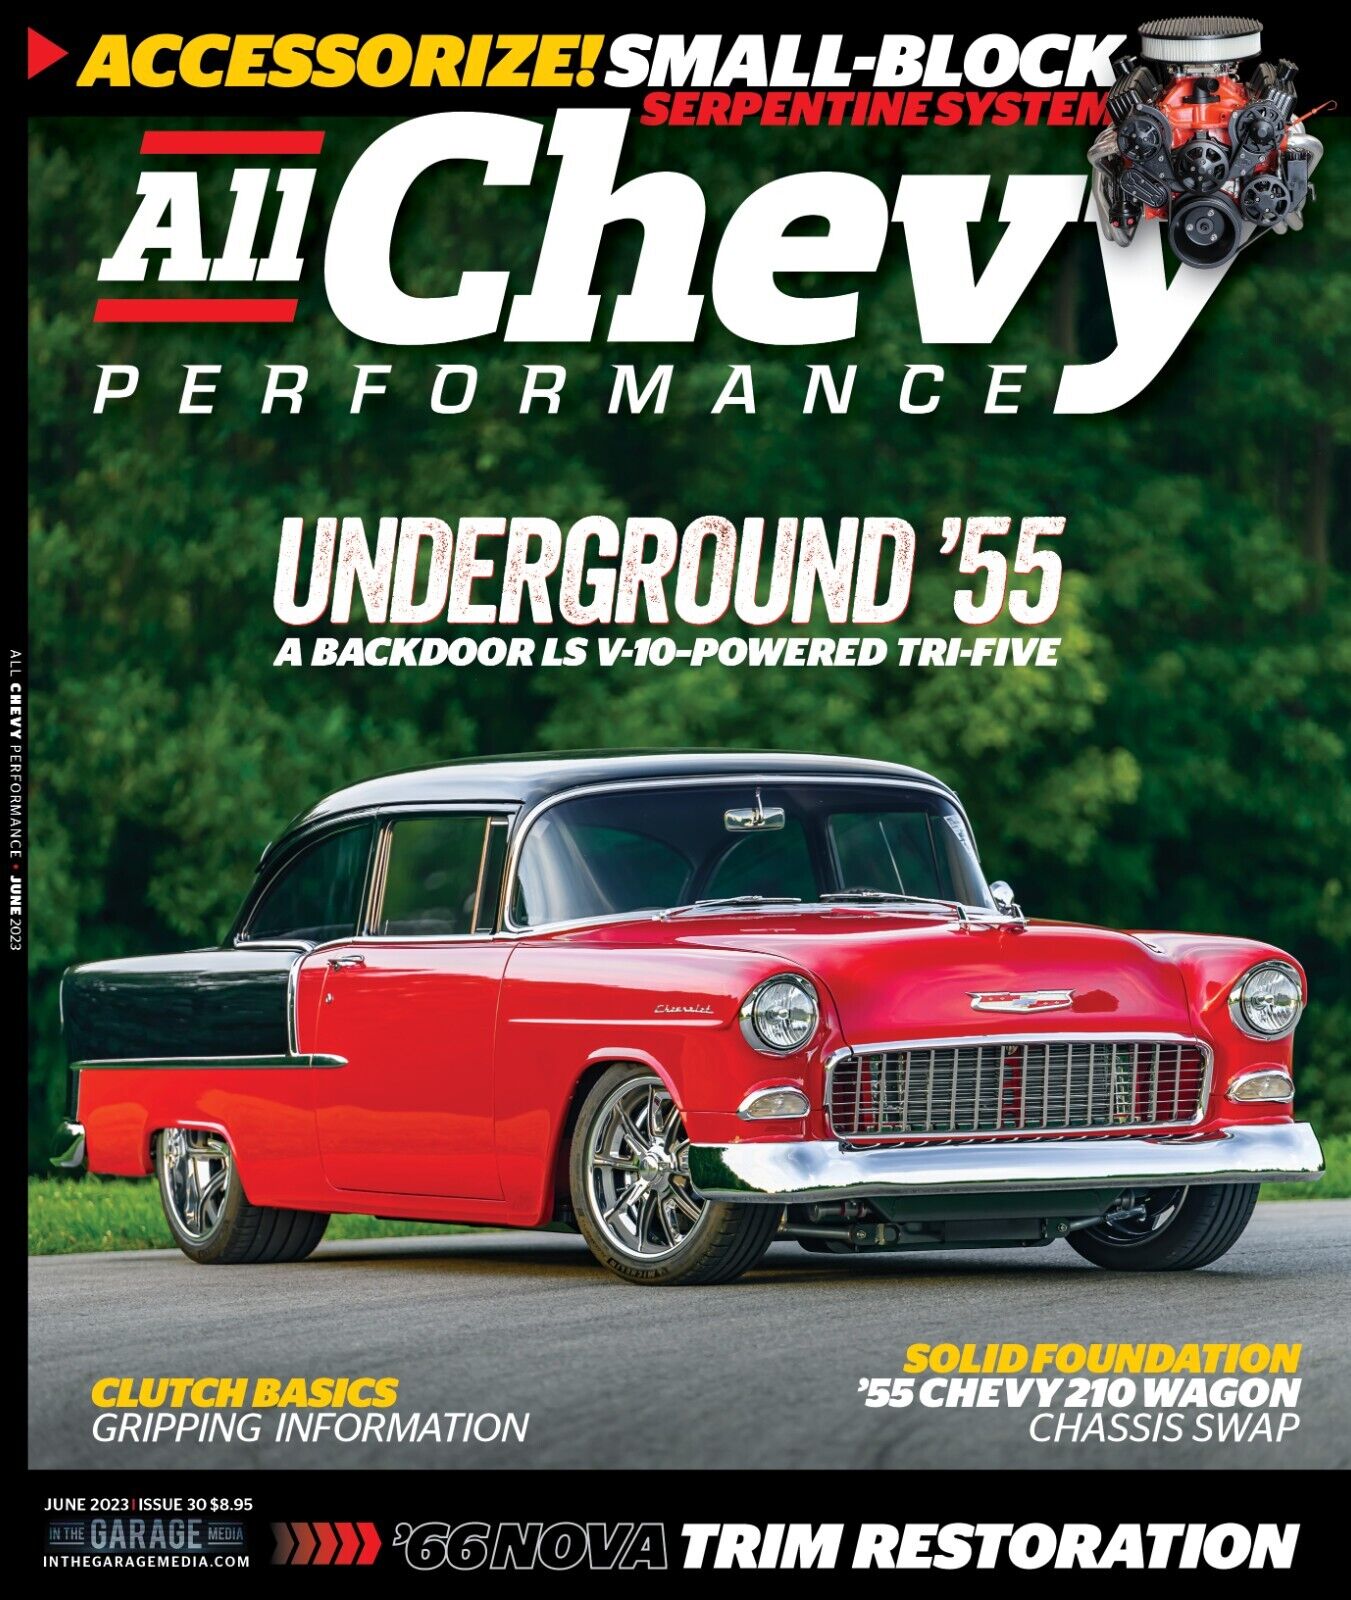 All Chevy Performance Magazine Issue #30 June 2023 - New